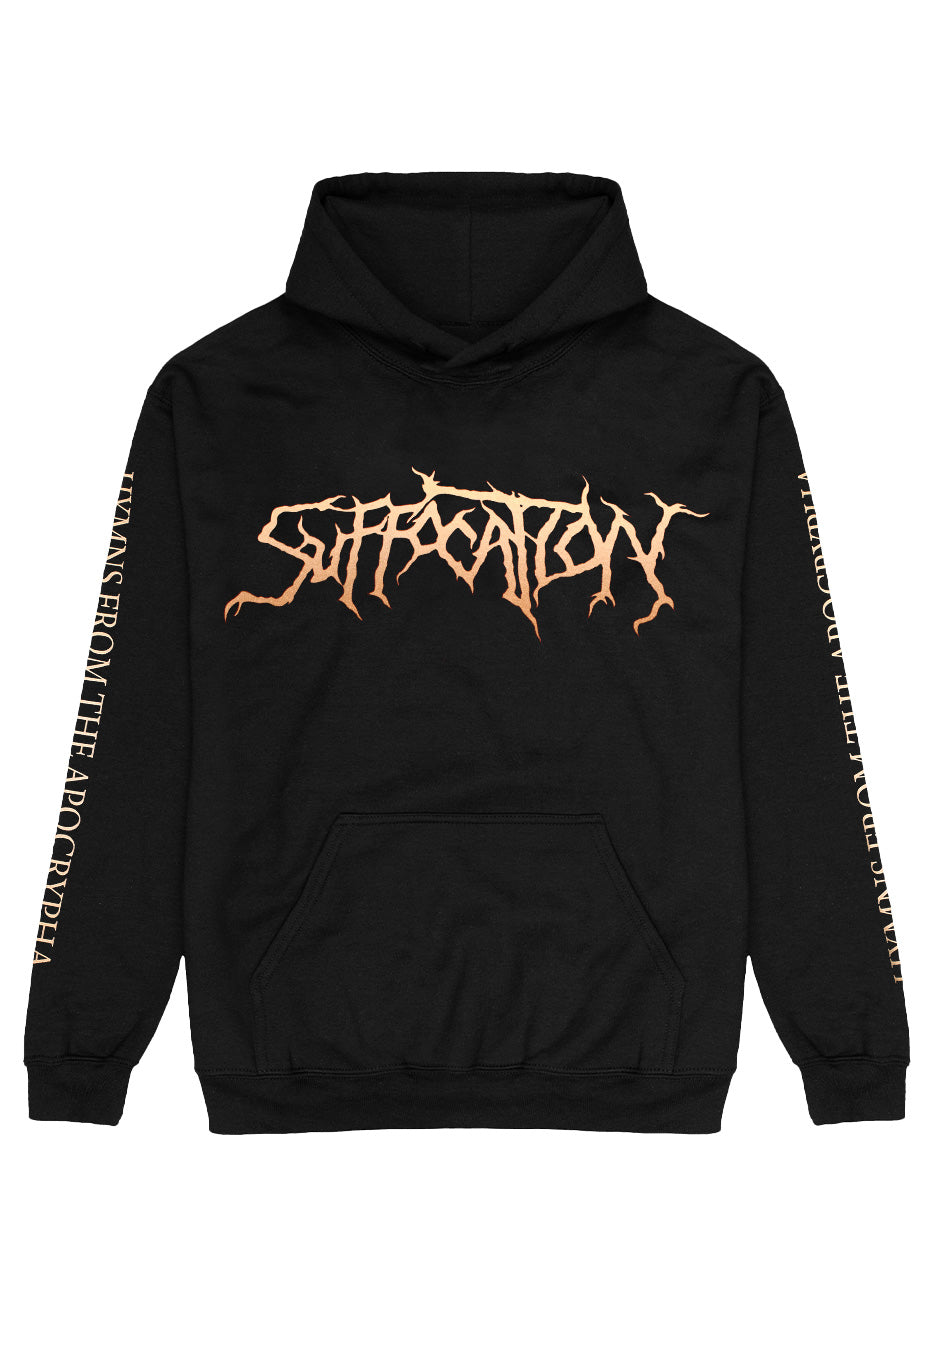 Suffocation - Hymns - Hoodie